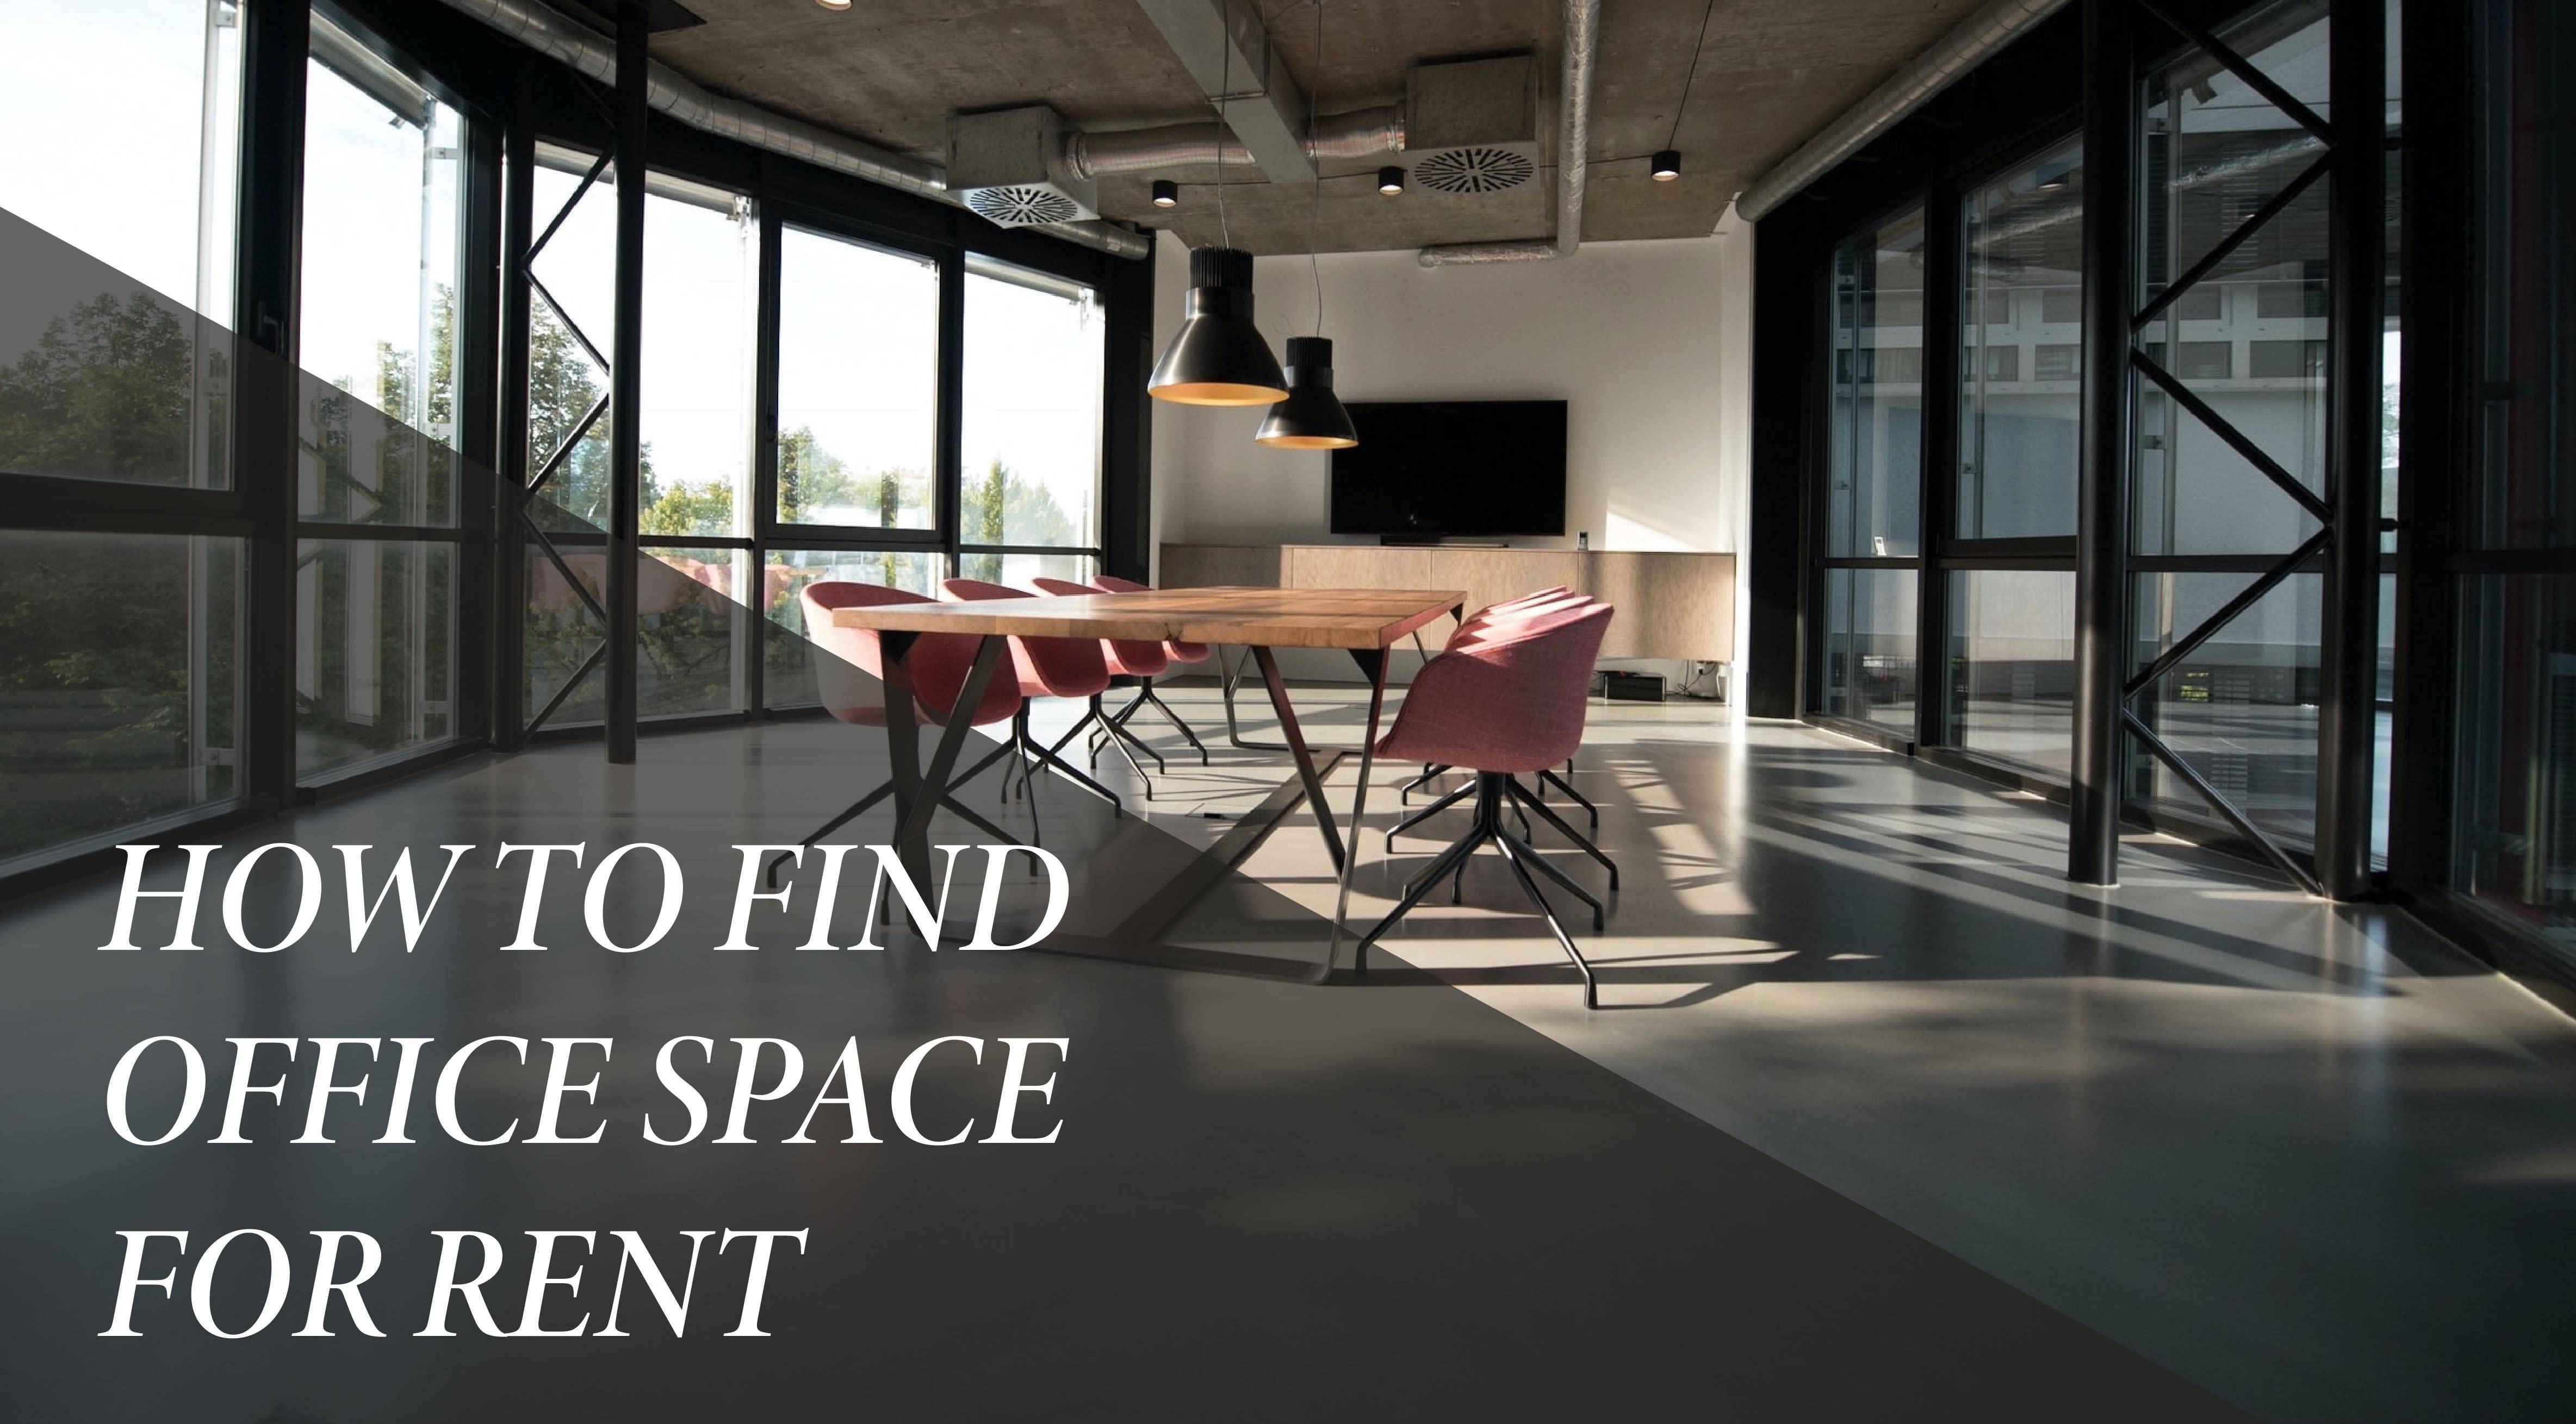 Tips on how to find office space for rent | My Perfect Workplace